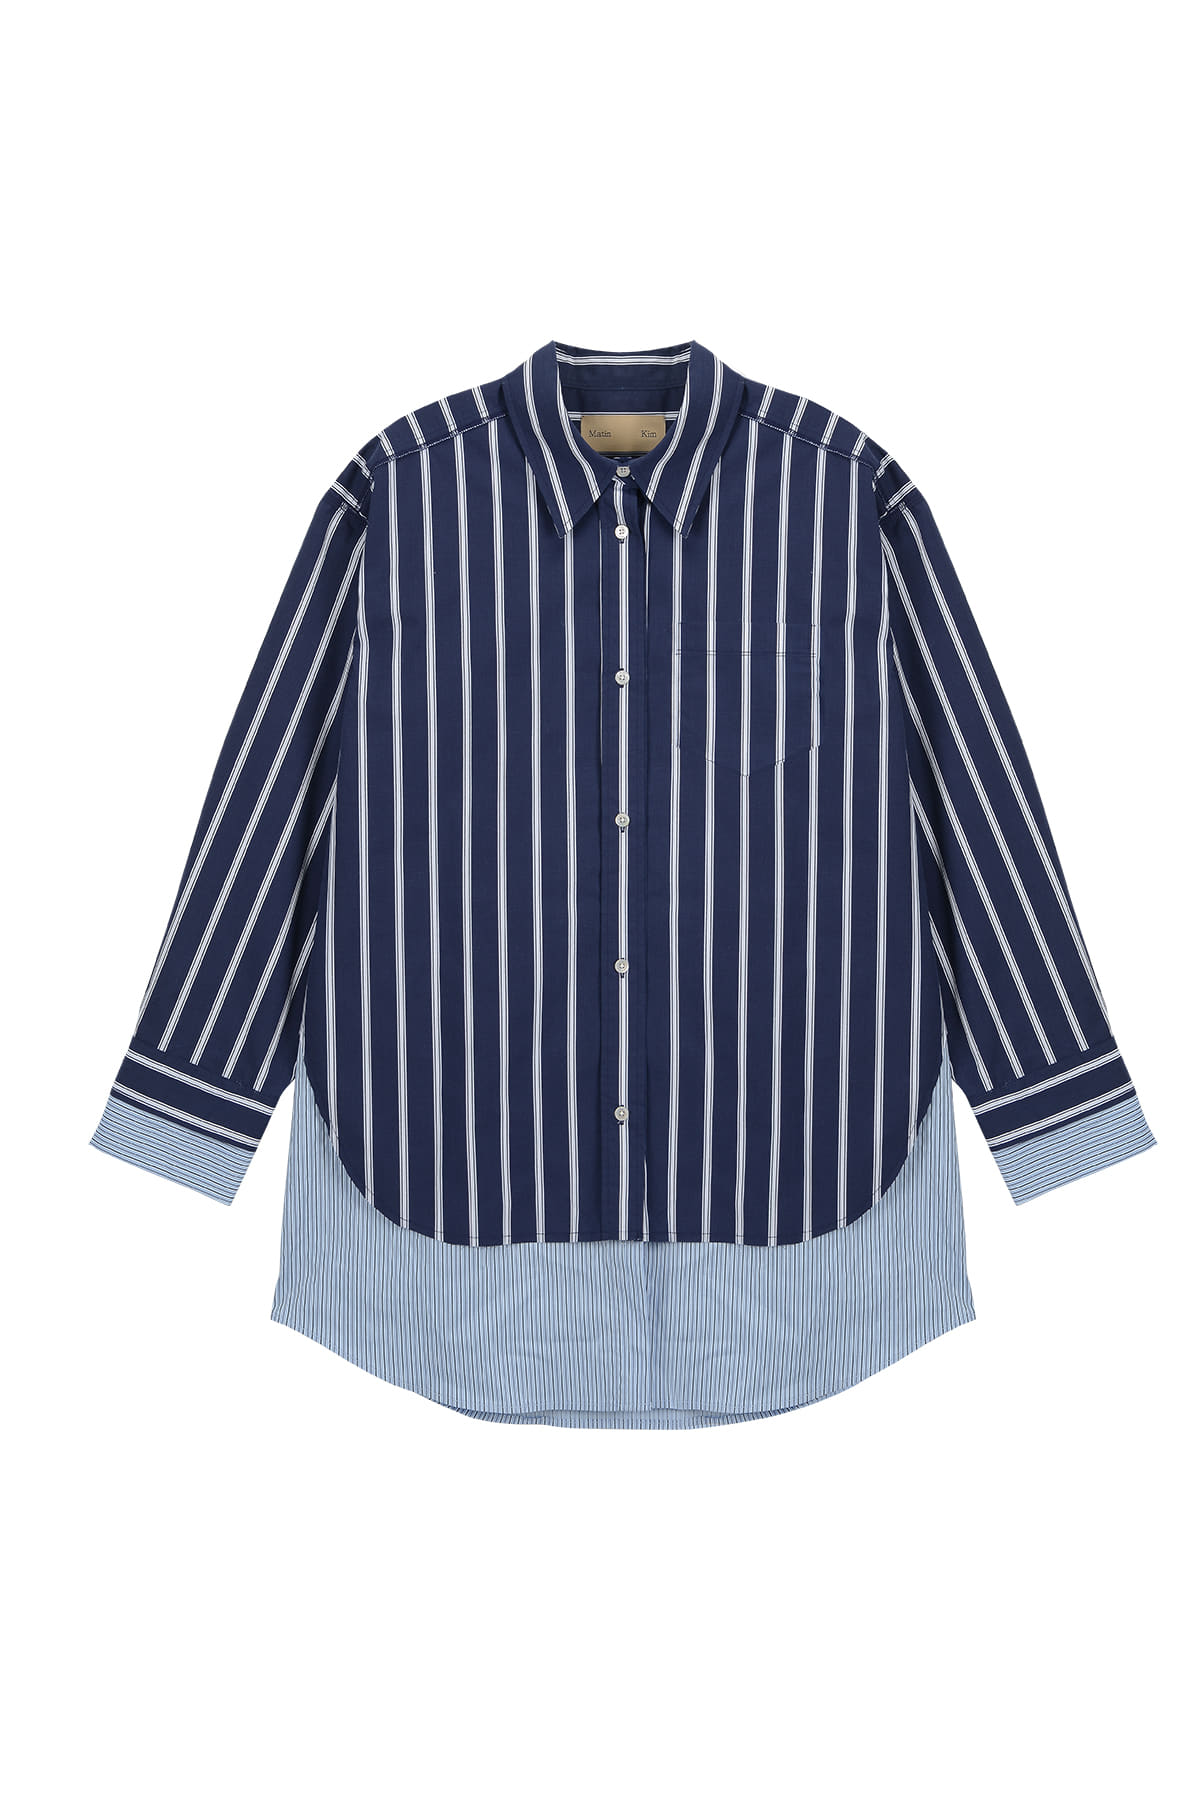 DOUBLE LAYERS STRIPE SHIRT IN NAVY